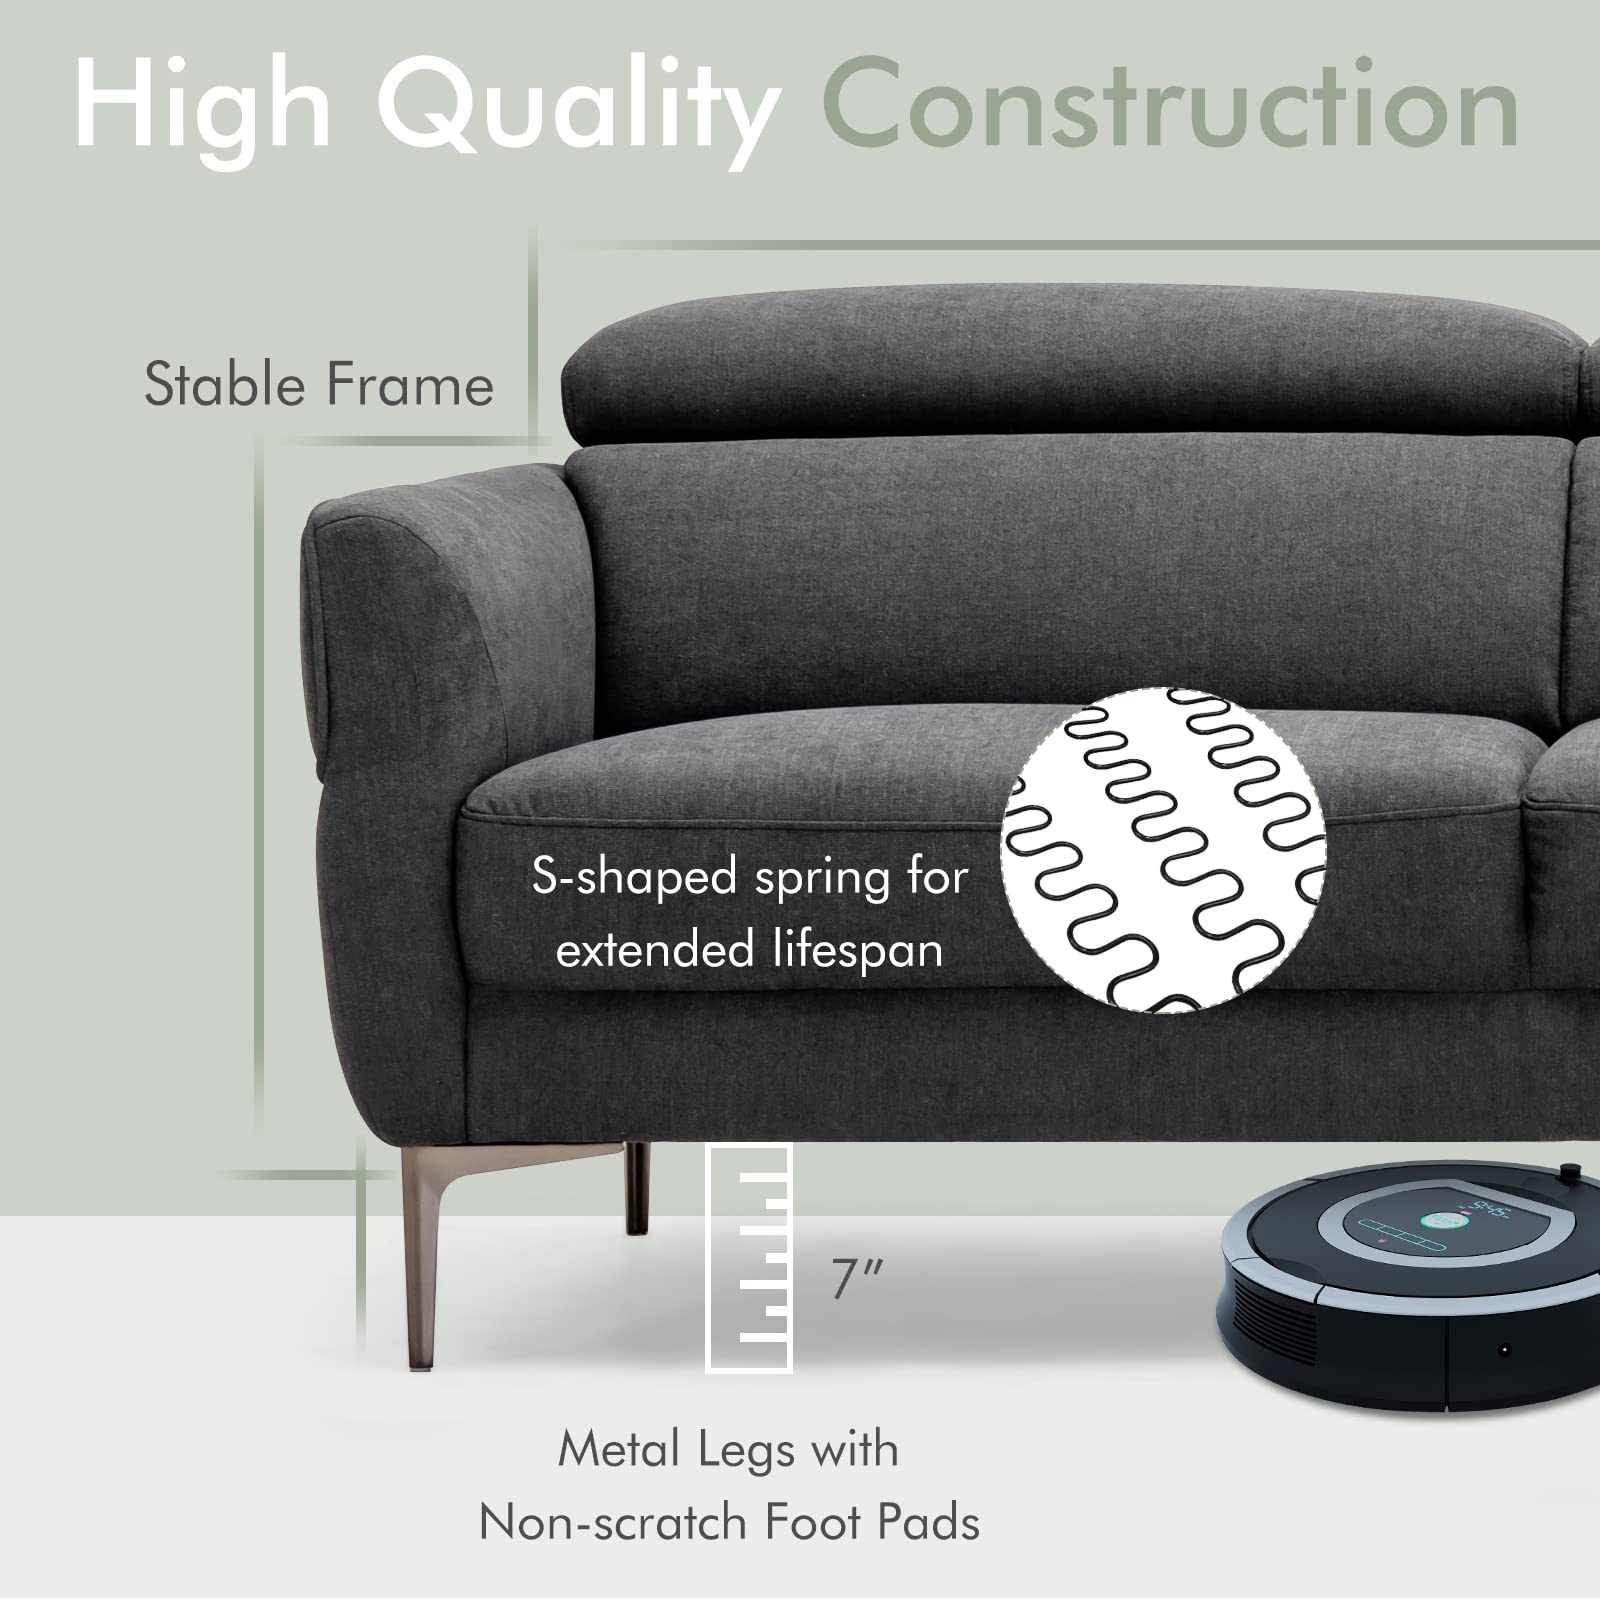 Giantex Couch, Upholstered Loveseat with Lift-up Headrest and Metal Legs